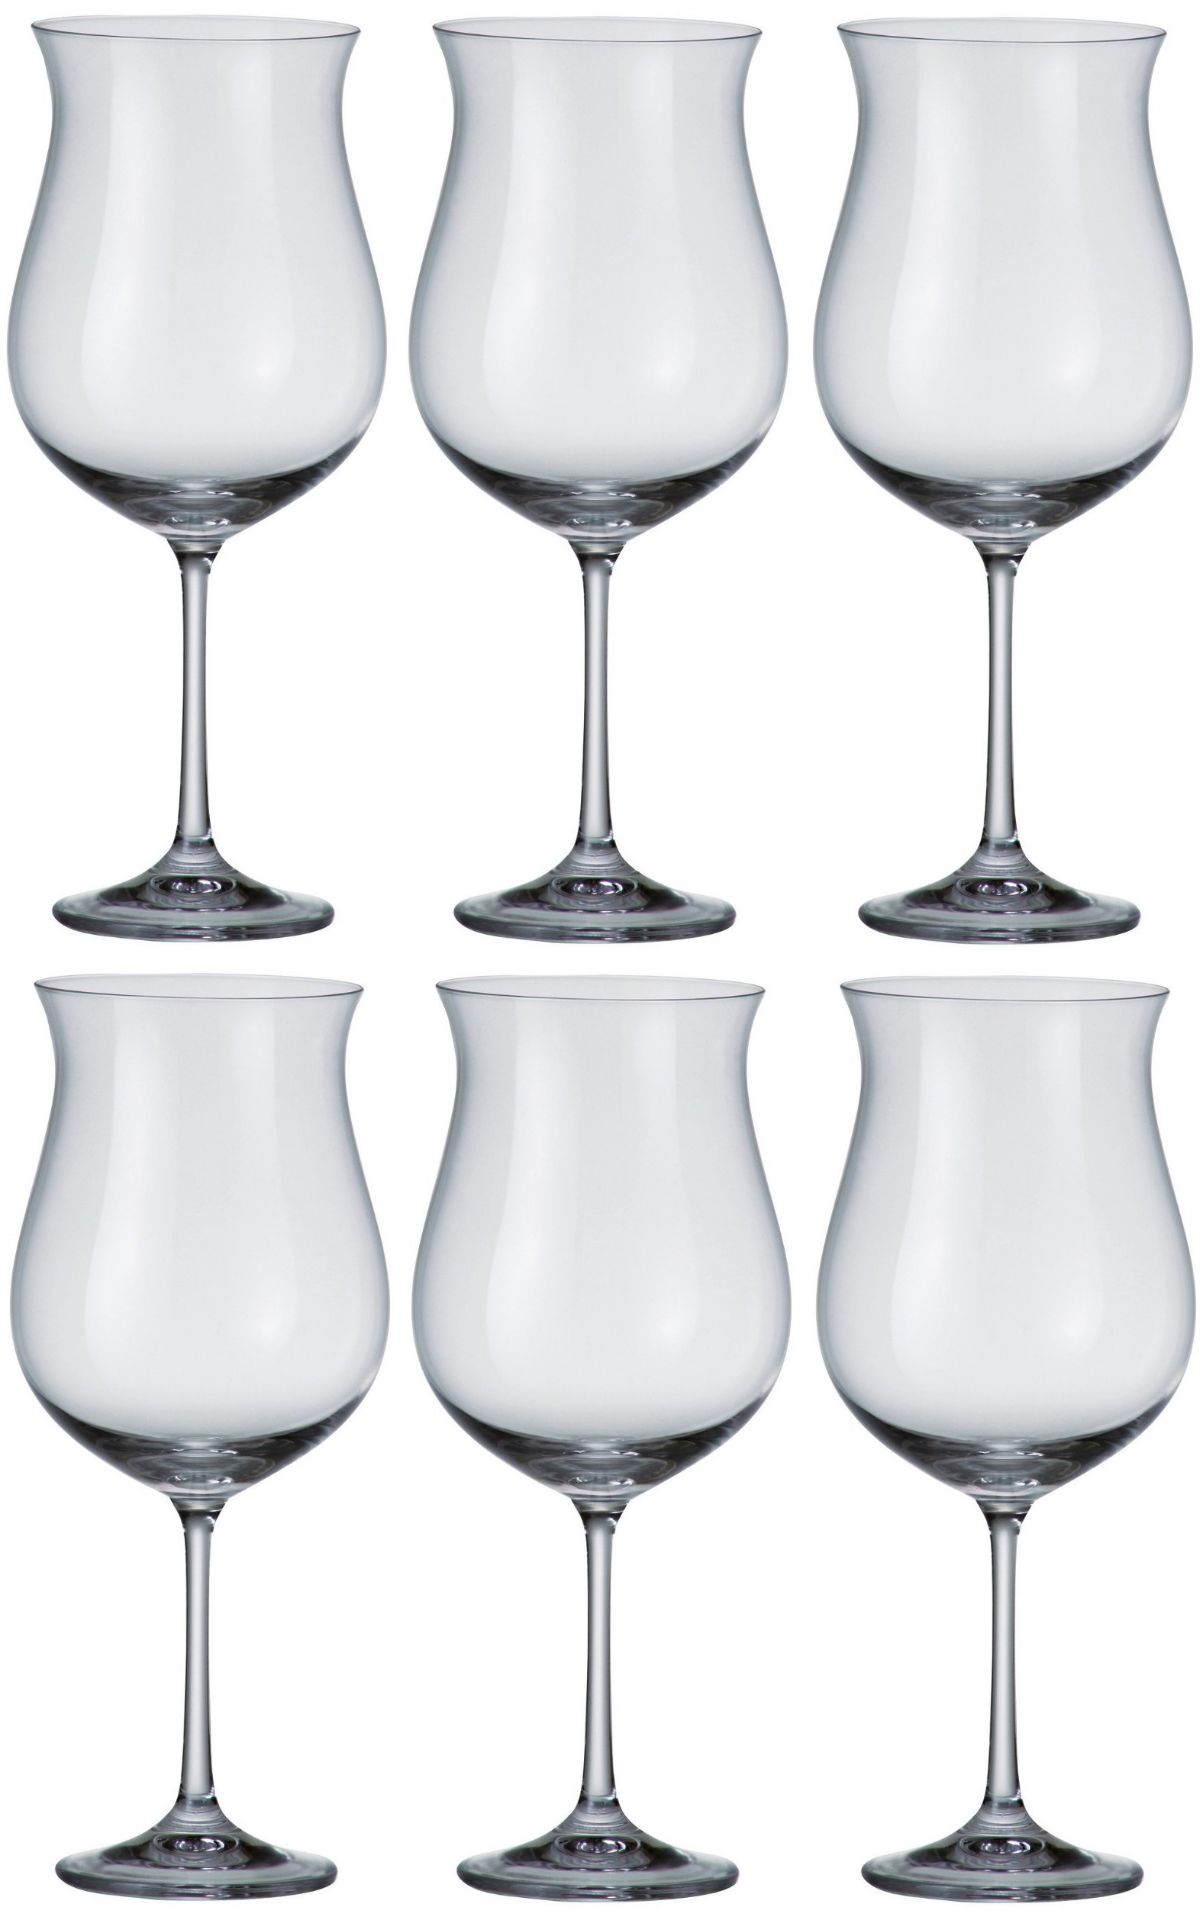 V *TRADE QTY* Brand New Pack of Six 640ml Red Wine Glasses - Large Sized Bowl - Dishwasher Safe -